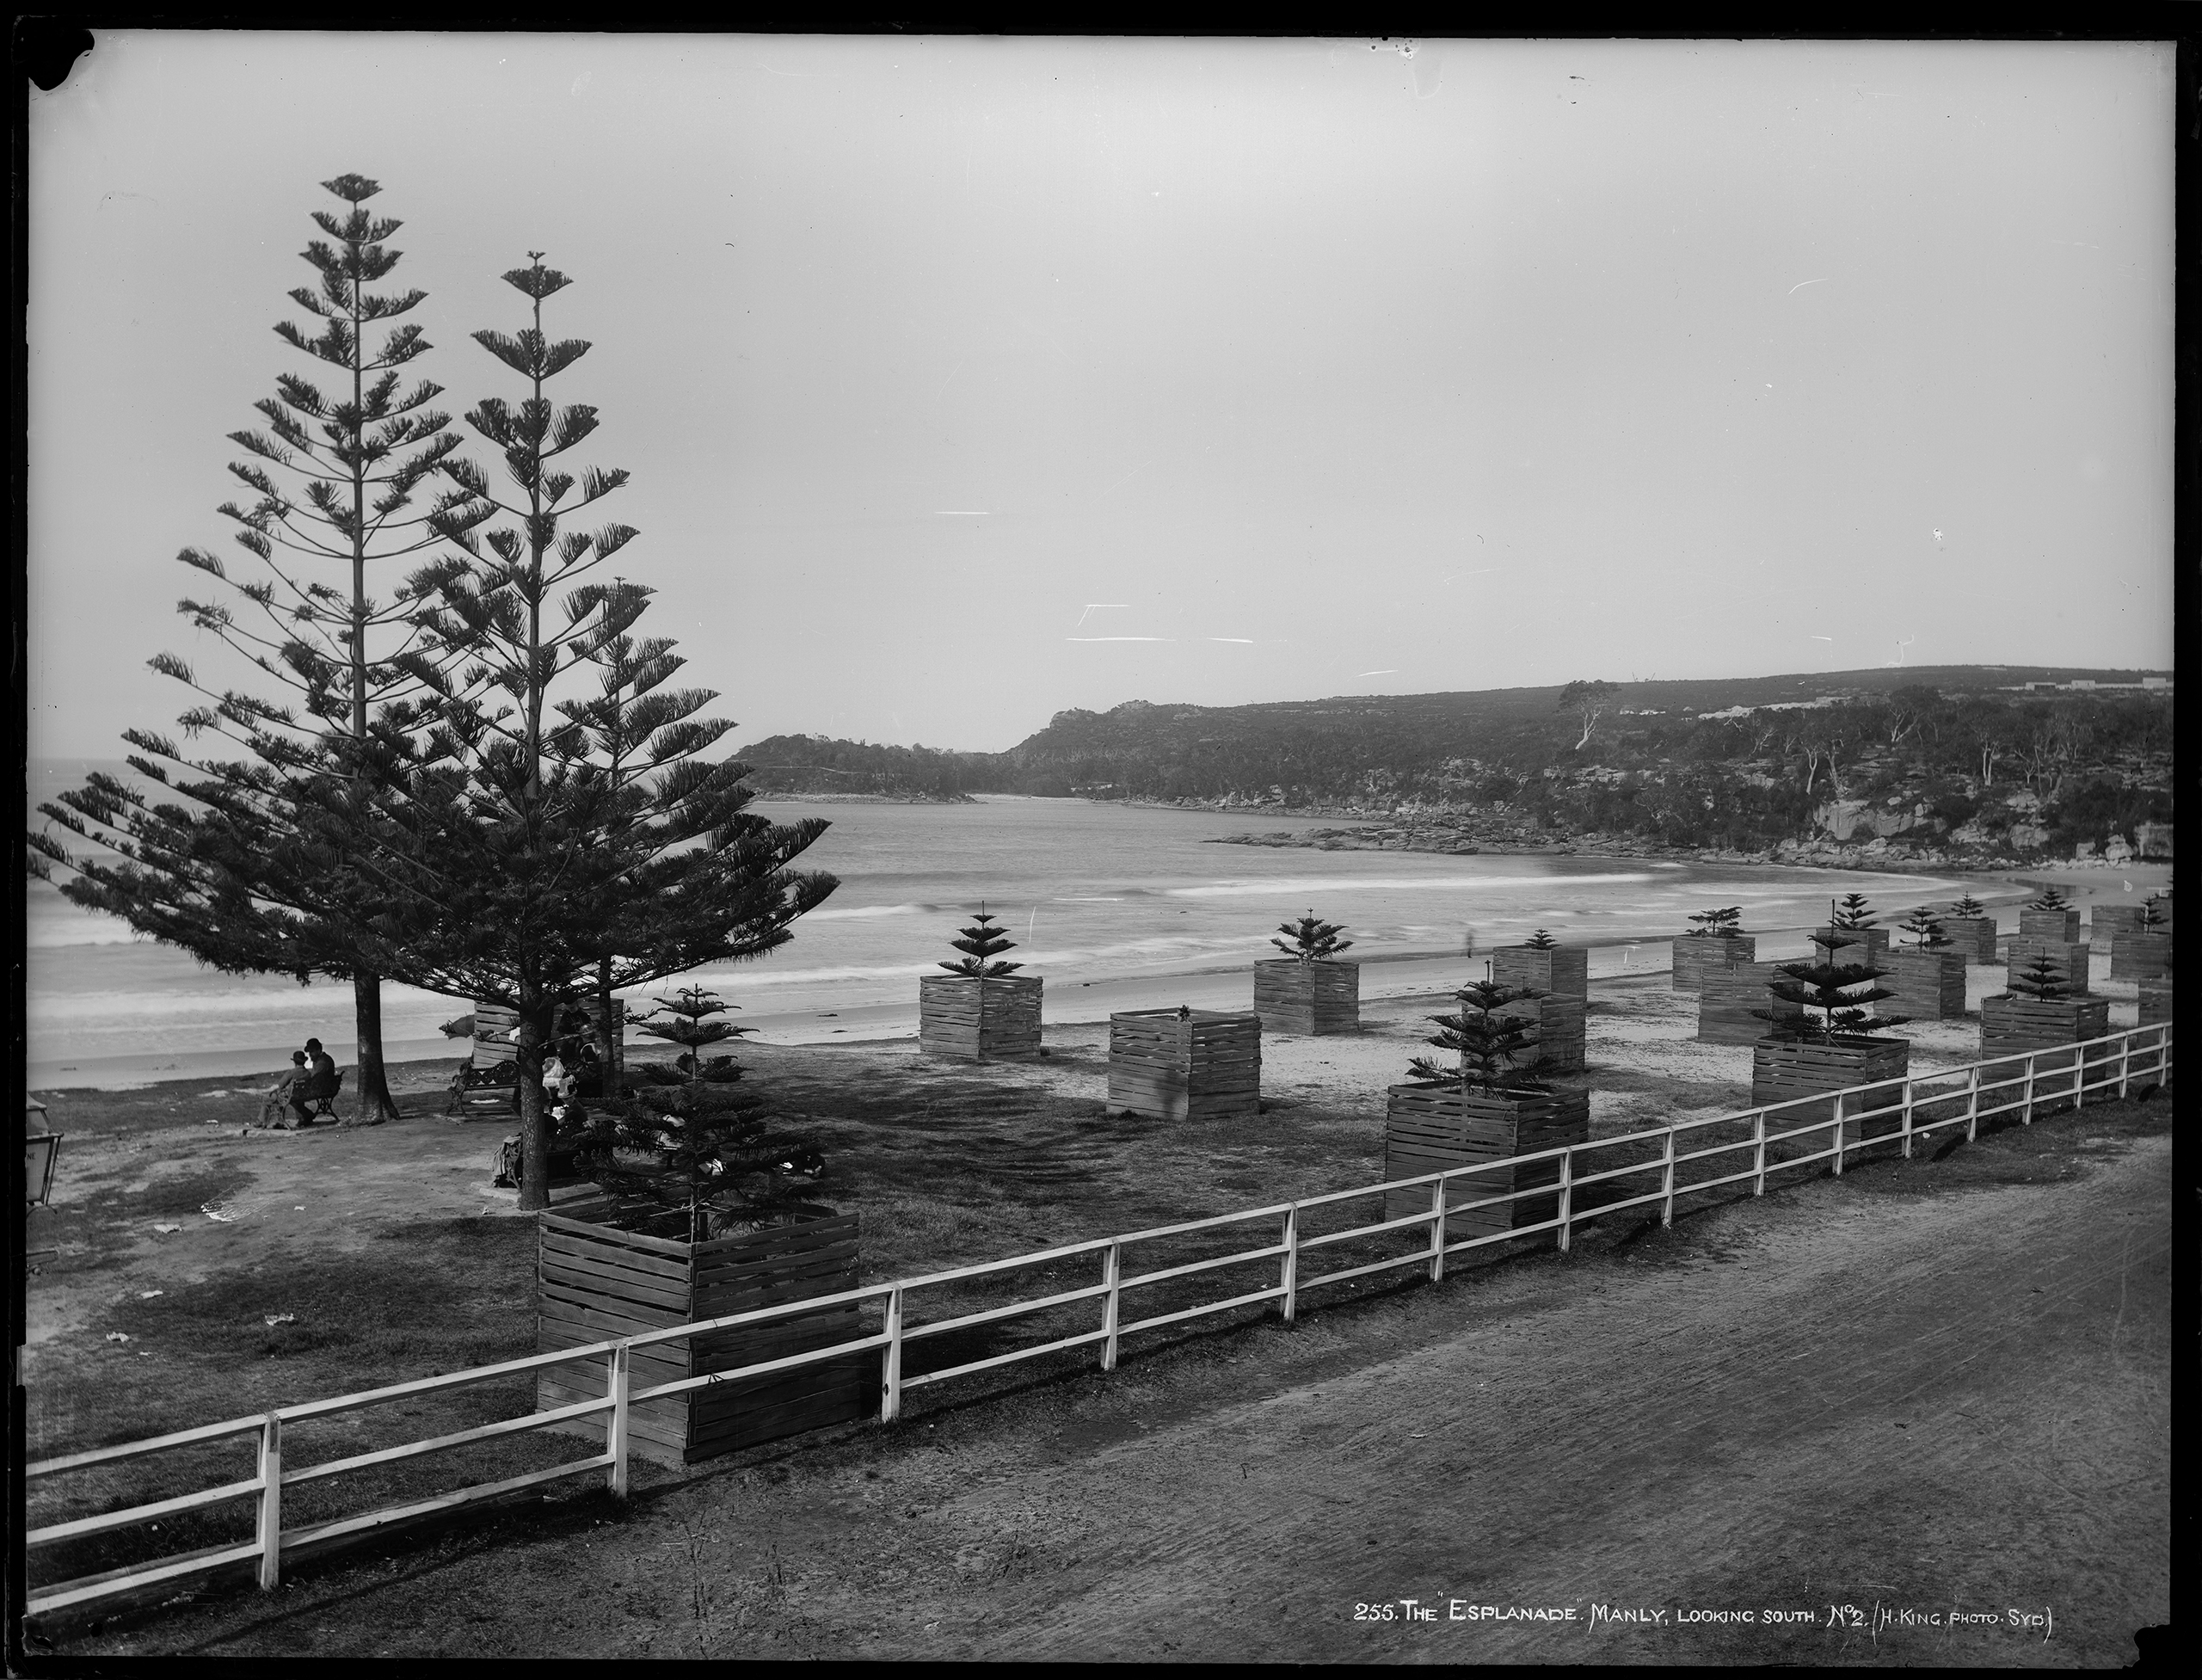 'The Esplanade, Manly, Looking South, No. 2' by Henry King